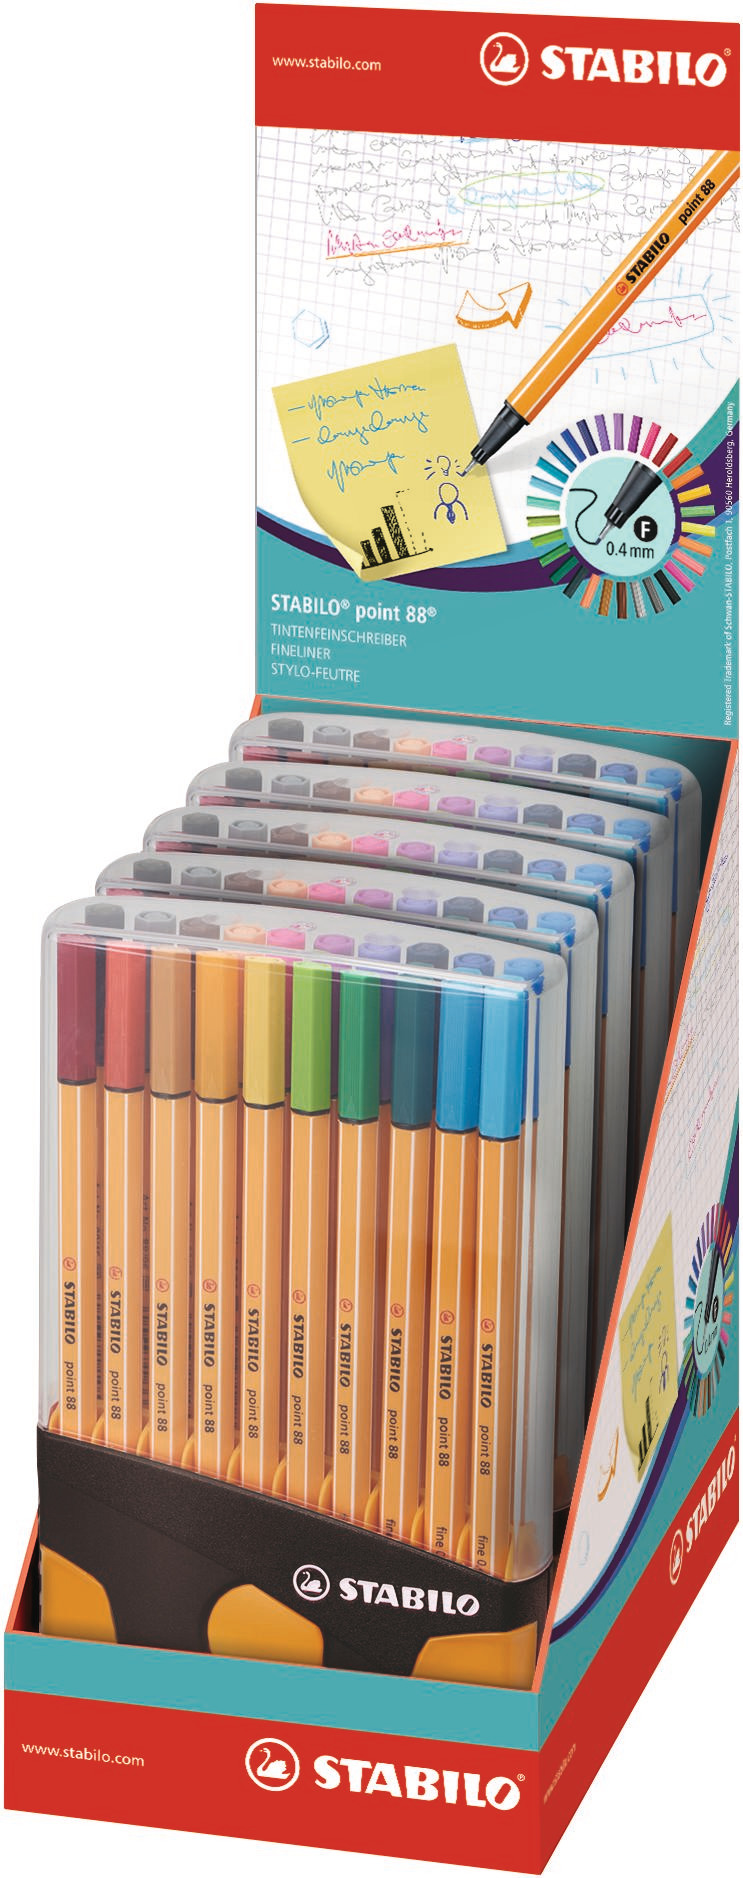 STABILO Fineliner Point 88 8820-03-05 20 pcs. ass. ColorParade